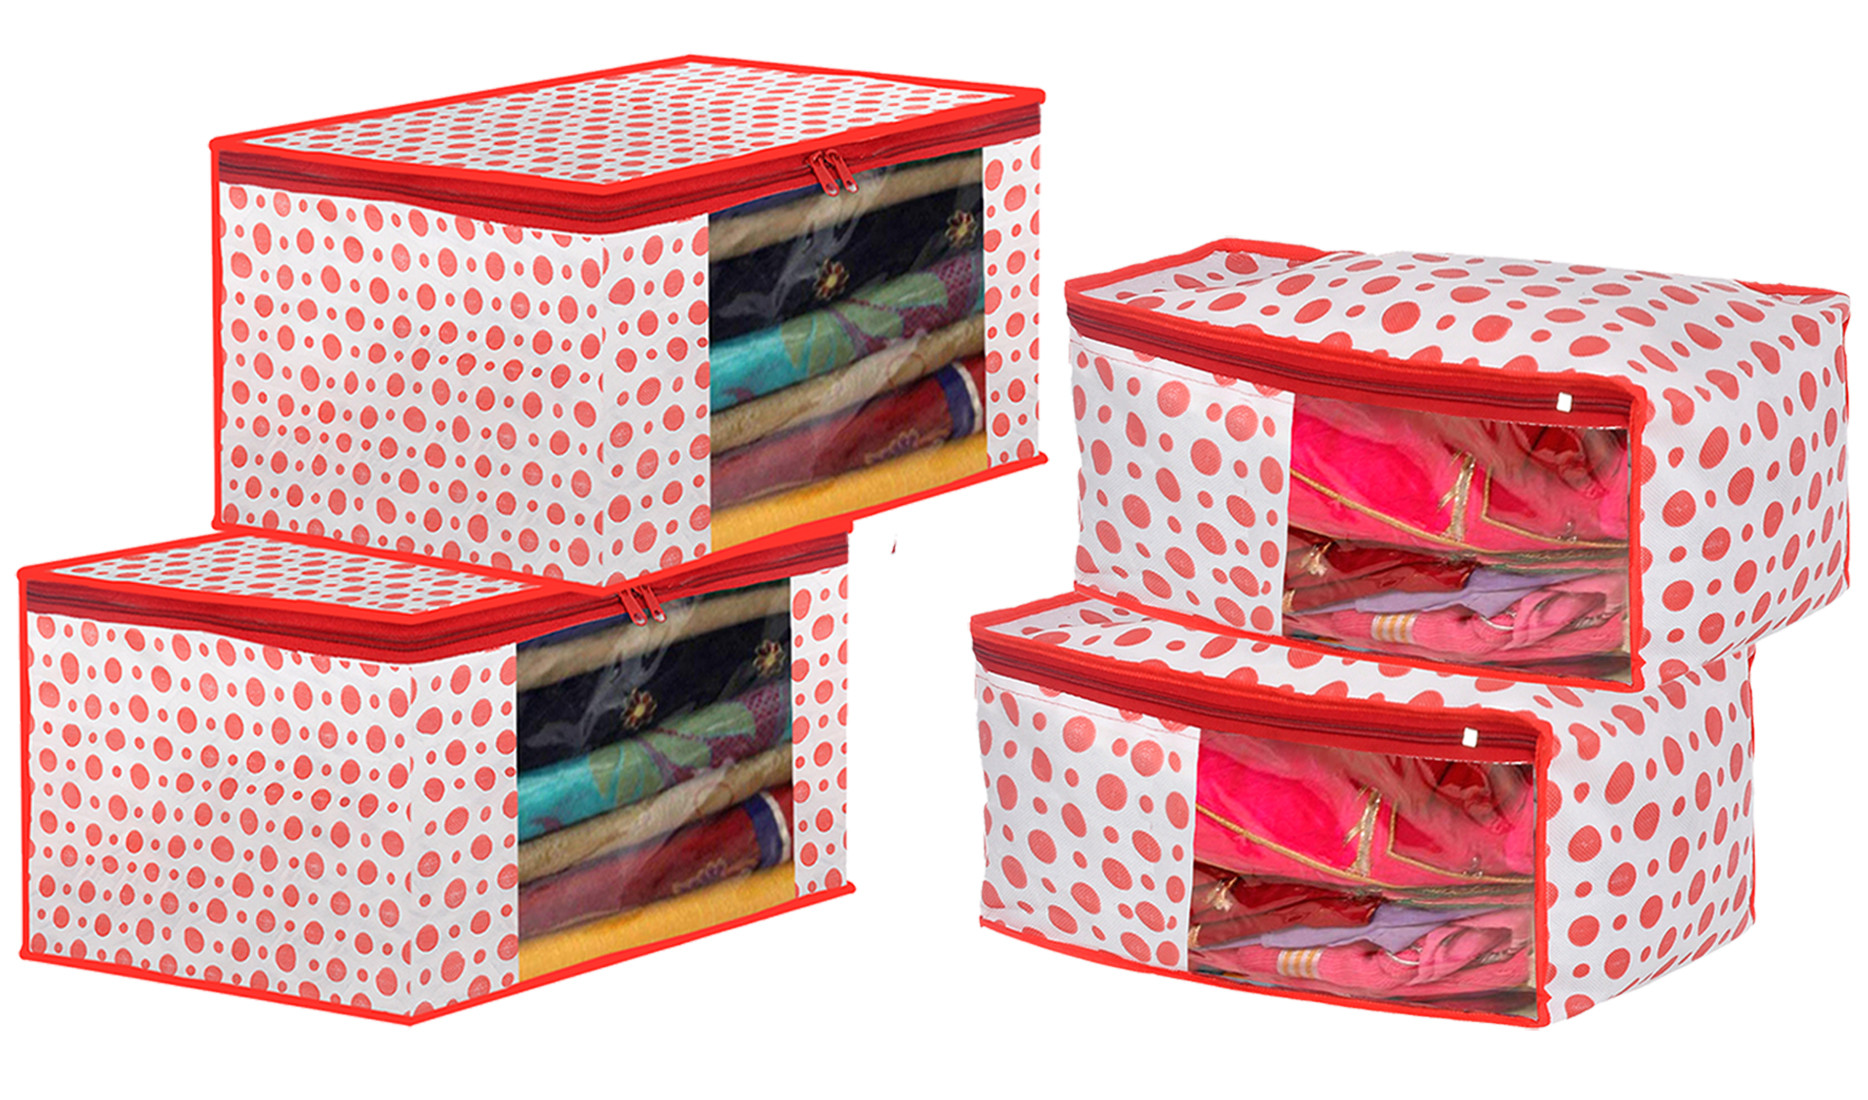 Kuber Industries Dot Printed Foldable, Lightweight Non-Woven Blouse & Saree Cover/Organizer Set With Tranasparent Window-(Pink)-46KM0471